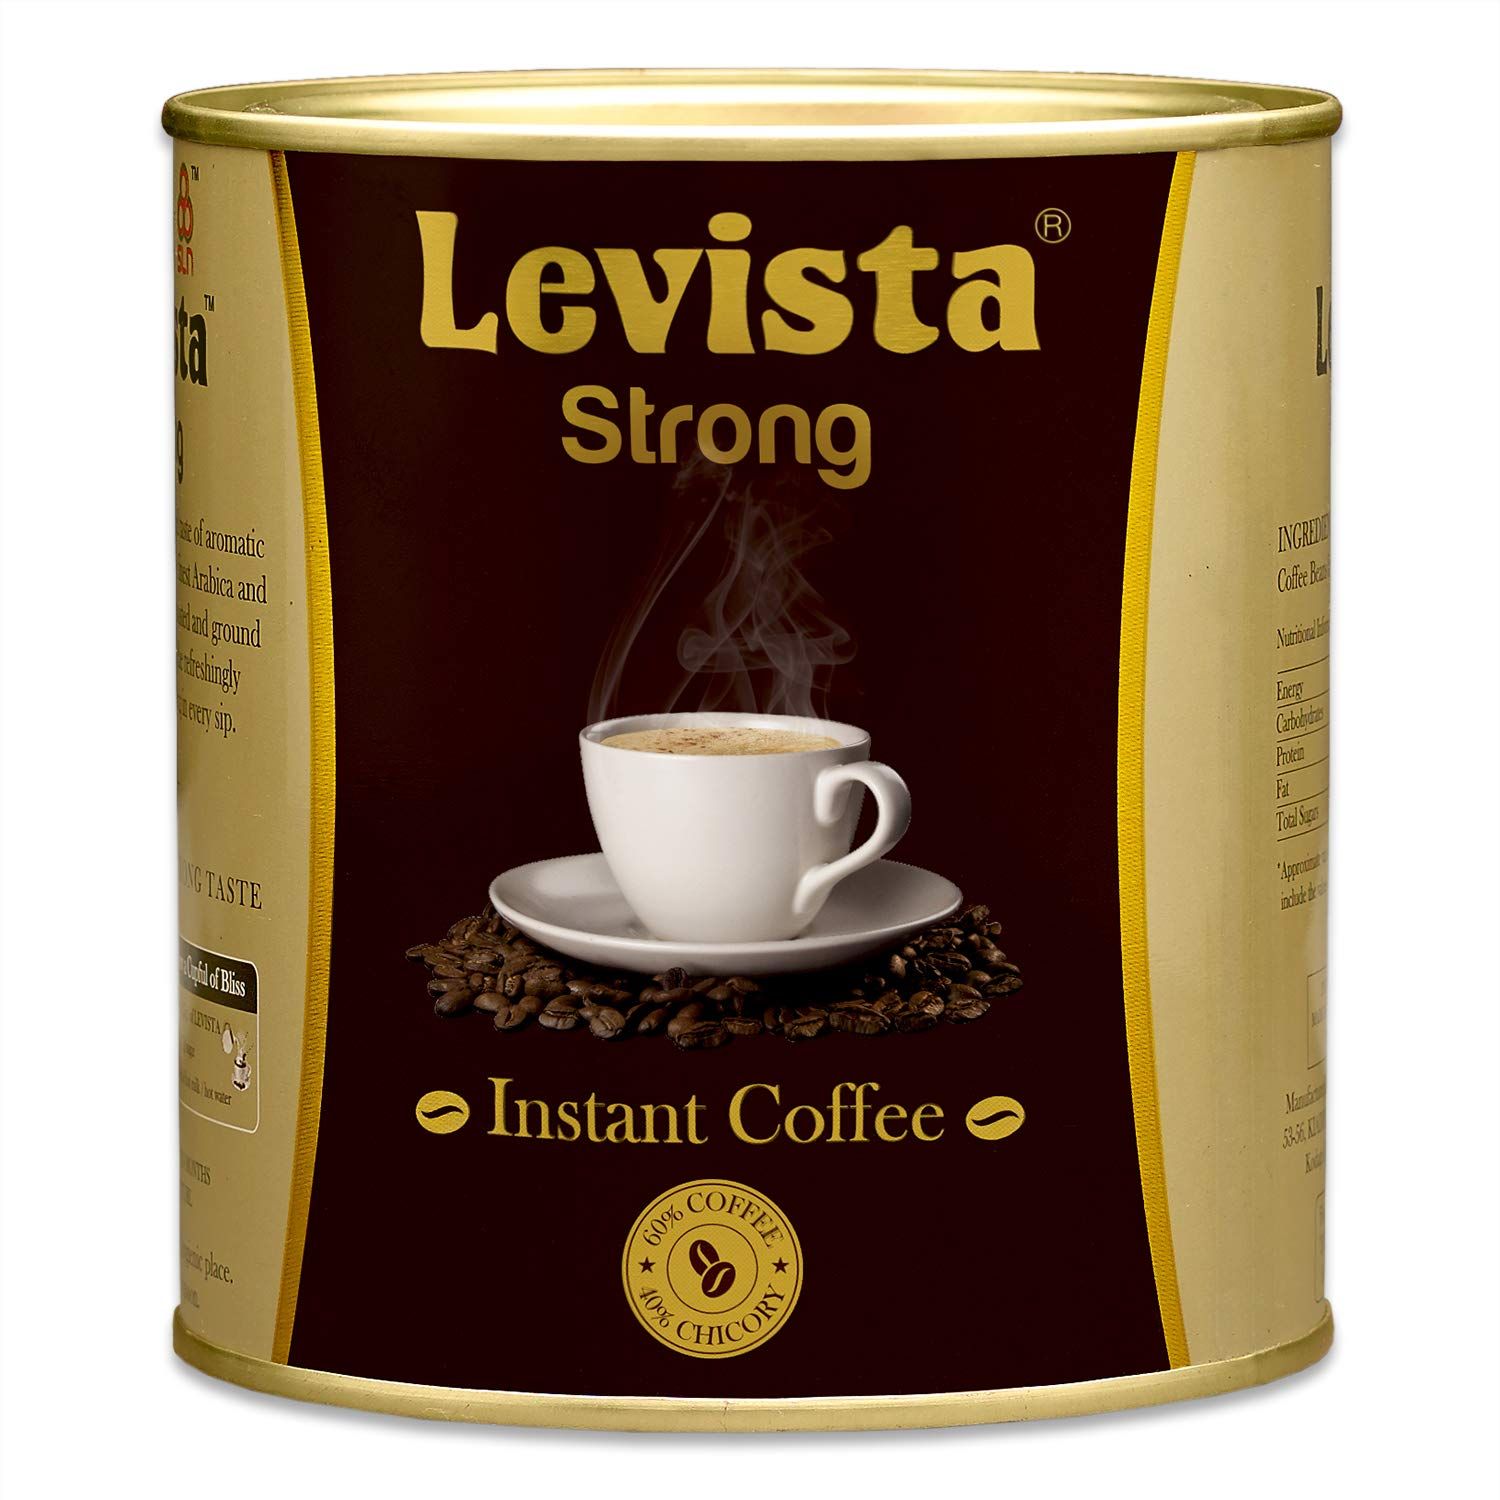 Levista Strong Instant Coffee Image